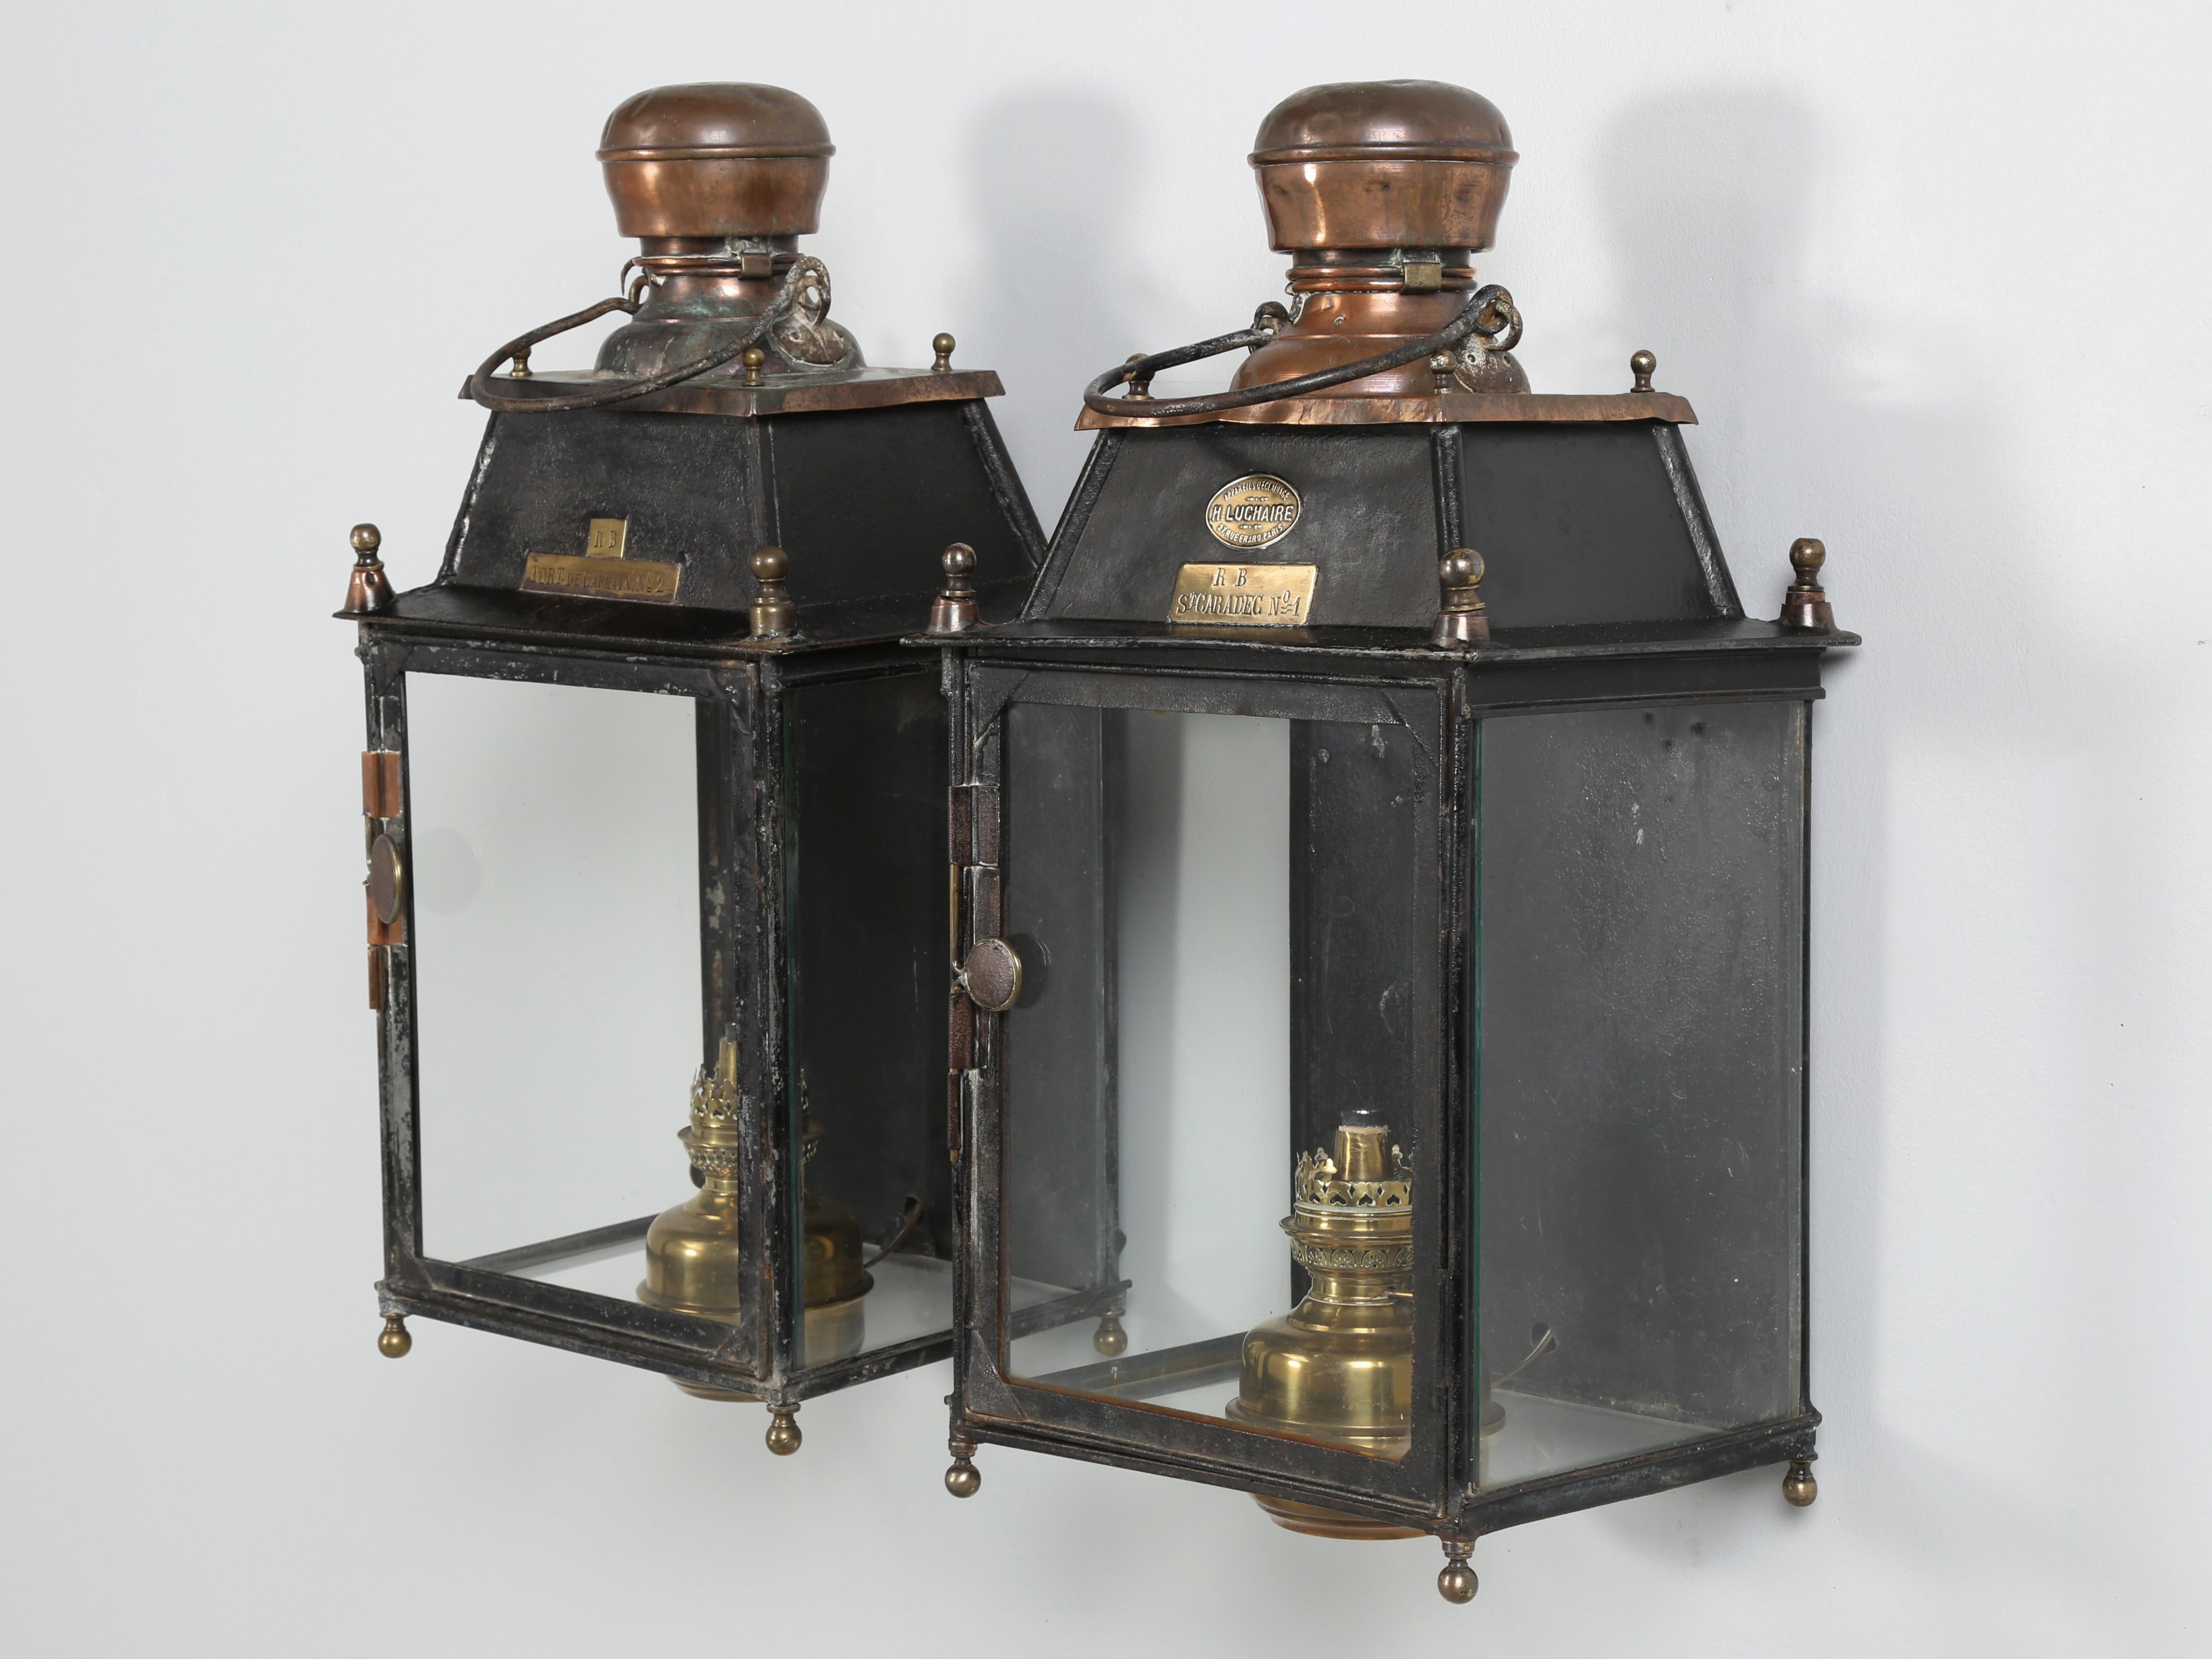 H. Luchaire & Company 27 rue Erand, Paris in the 12th district began business in 1720. Without a specific way to date the lantern, or wall sconce as the manufacturer referred to them as, this antique French copper and steel lantern design was known